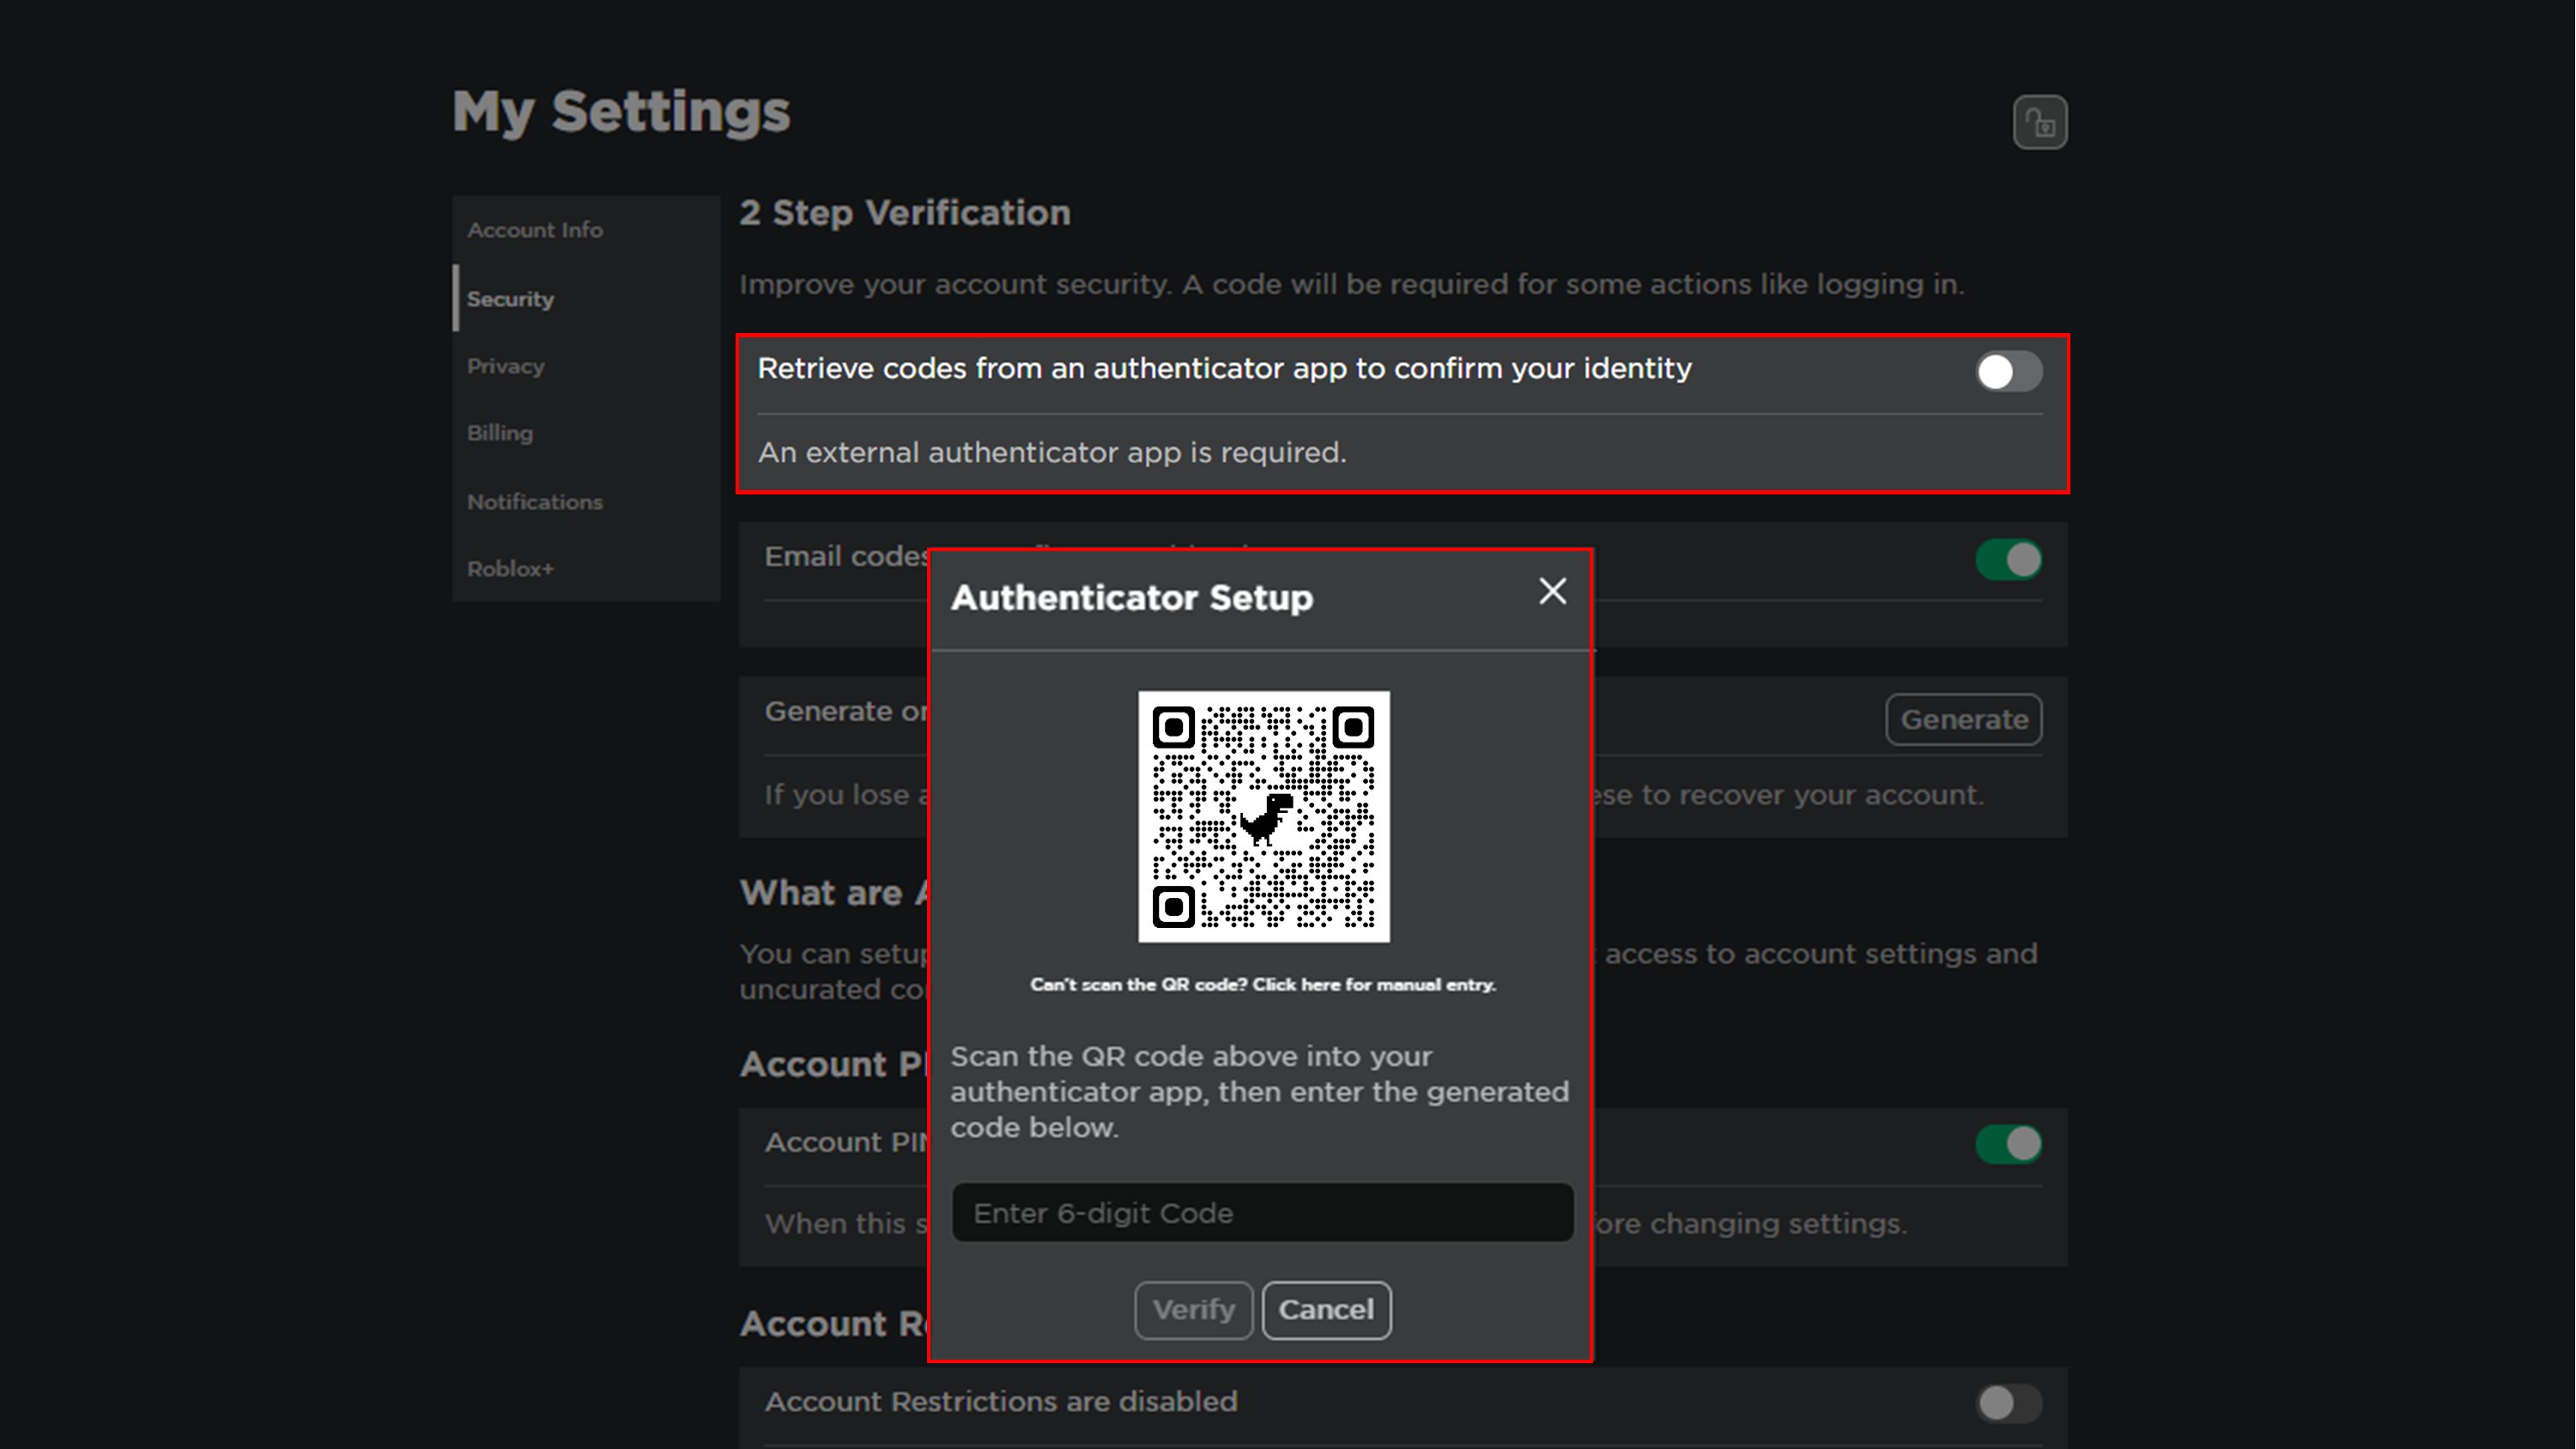 How to enable 2-Step Verification for Roblox